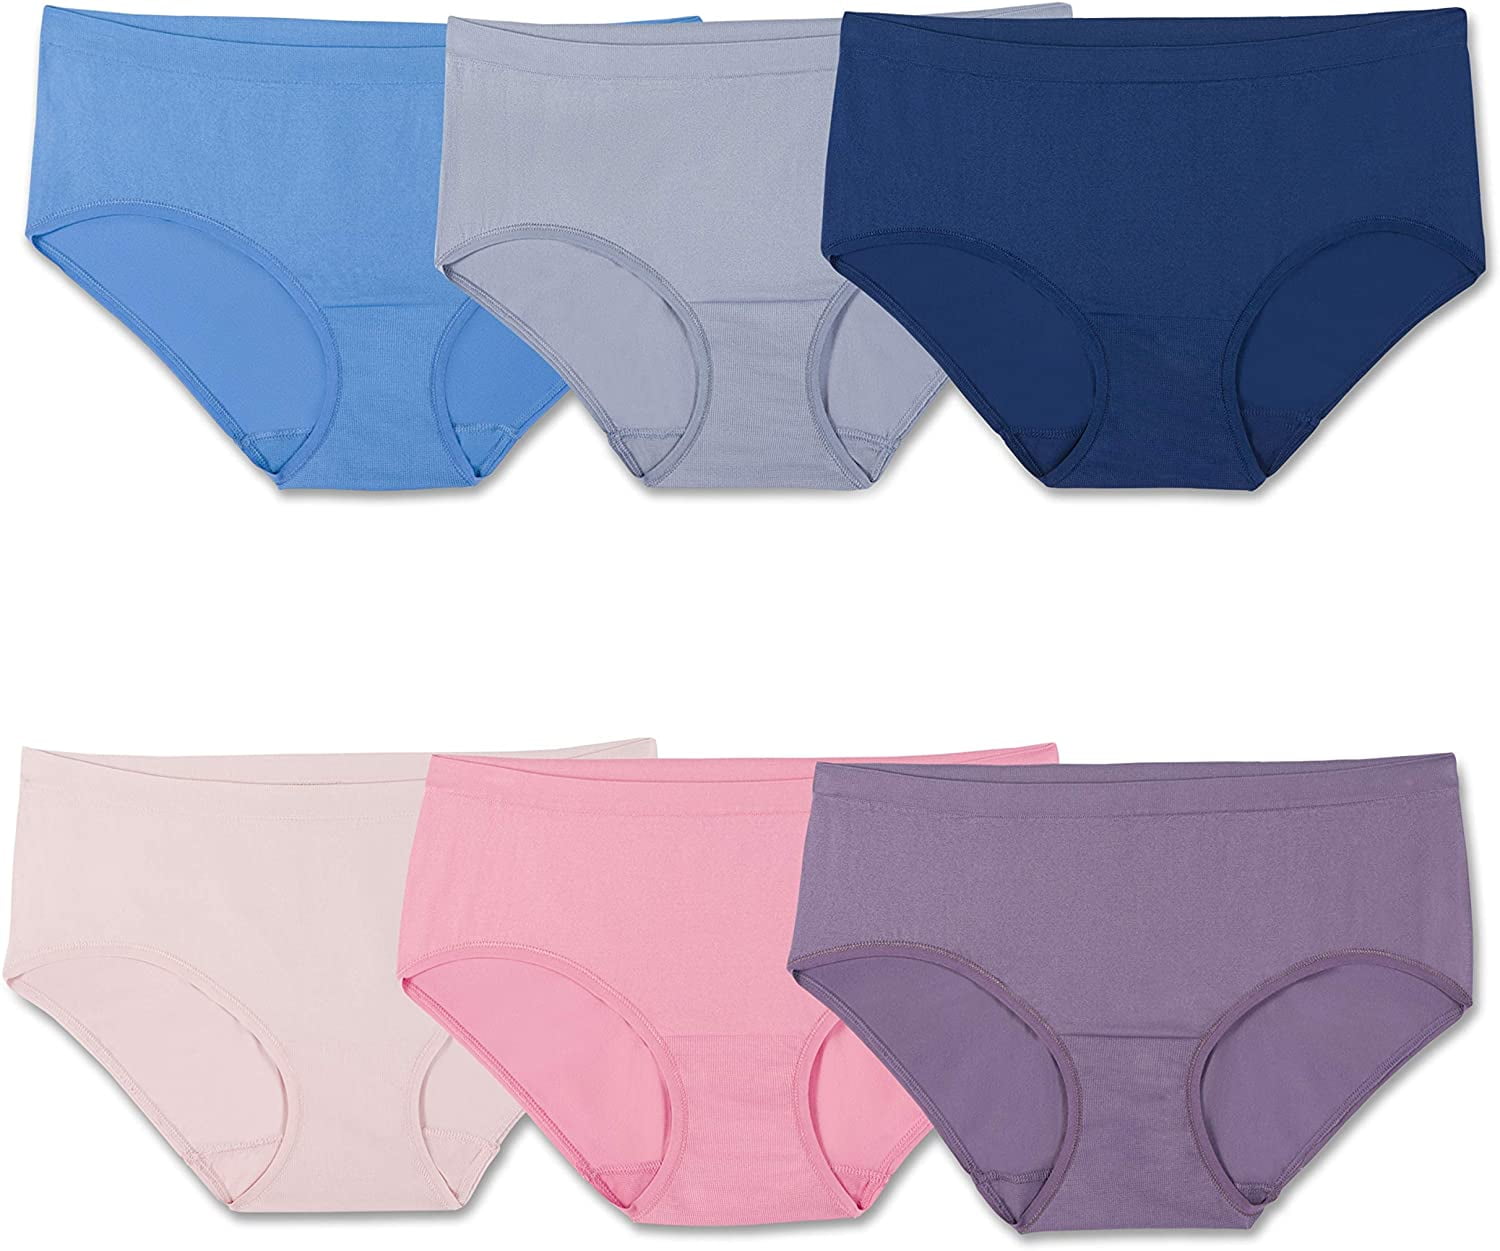 Fruit Of The Loom Women's Seamless Low-rise Brief, Assorted, Medium/6 ...